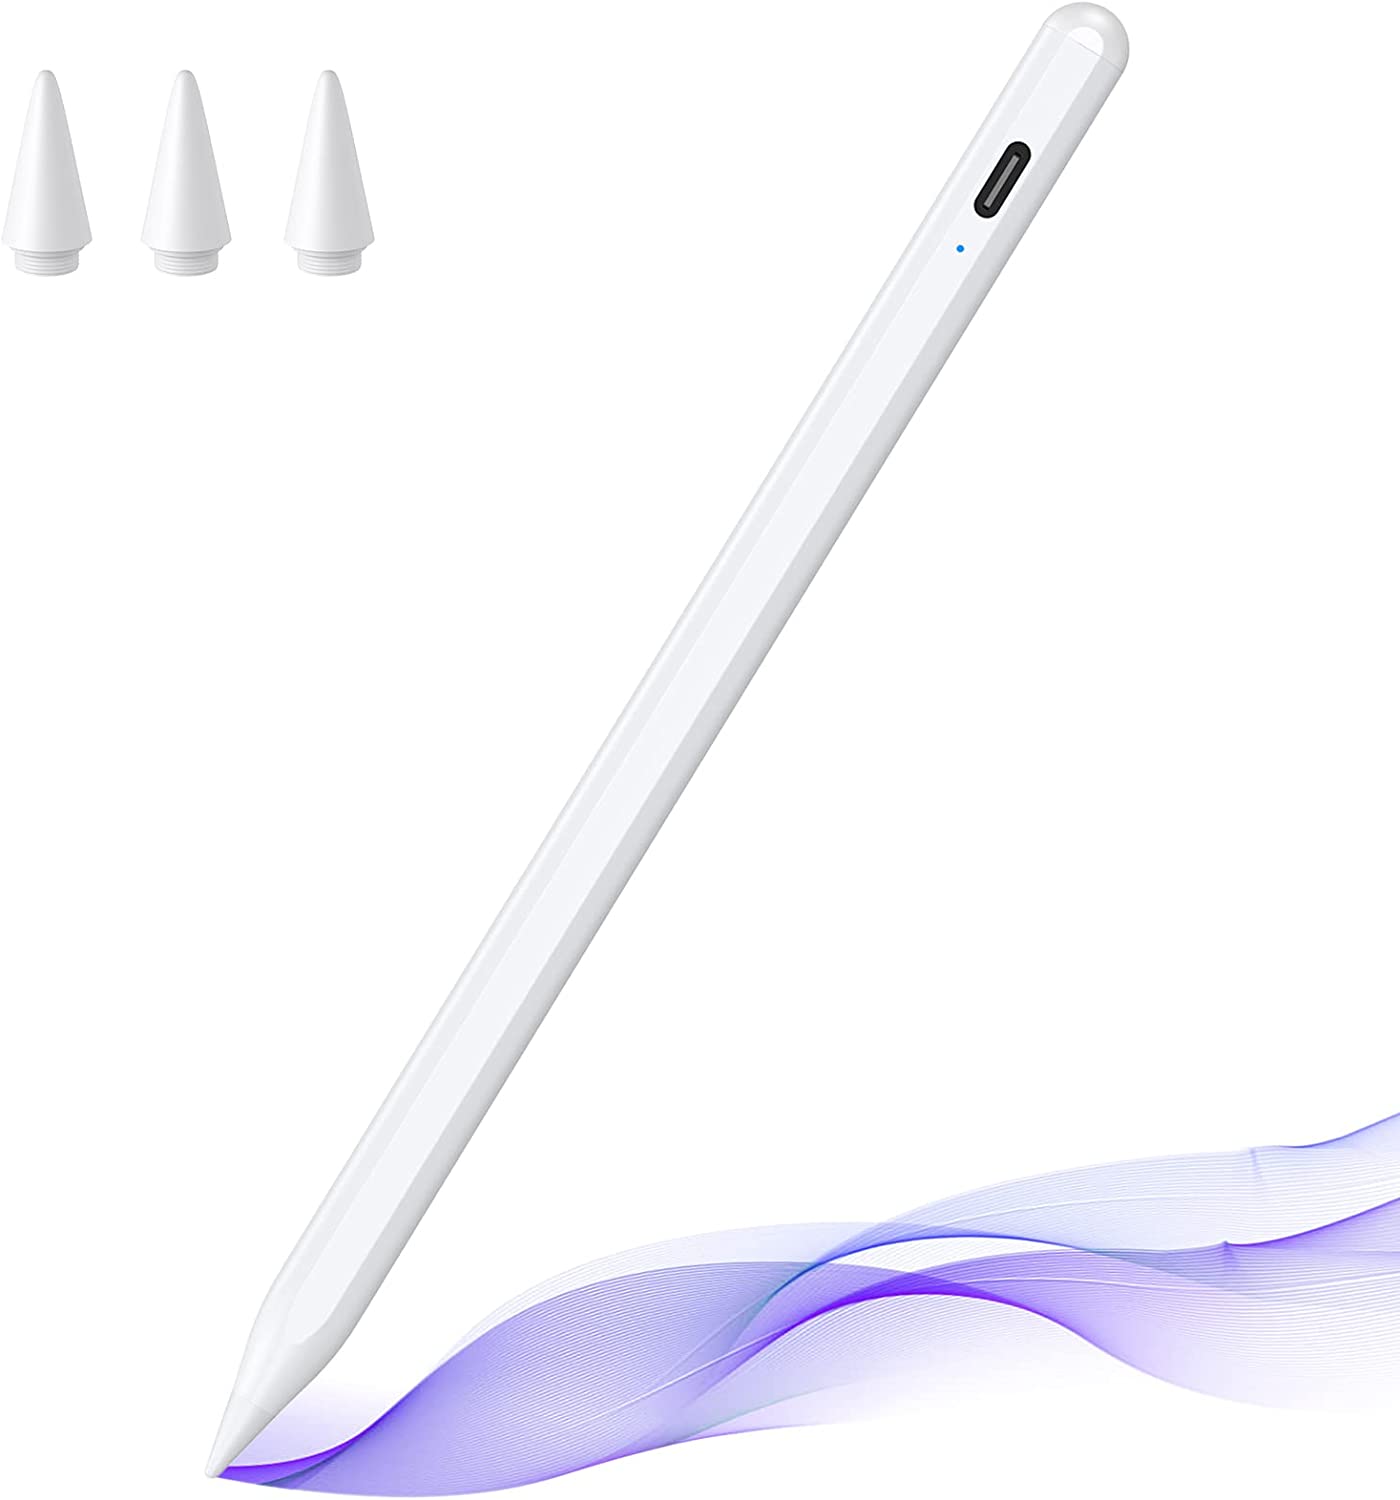 2022 Latest Design Procreate Stylus Pen For Ipad - Stylus Pen for iPad with Tilt Sensitive and Magnetic Design, Digital Pencil Compatible with 2018 and Later Model – Centyoo